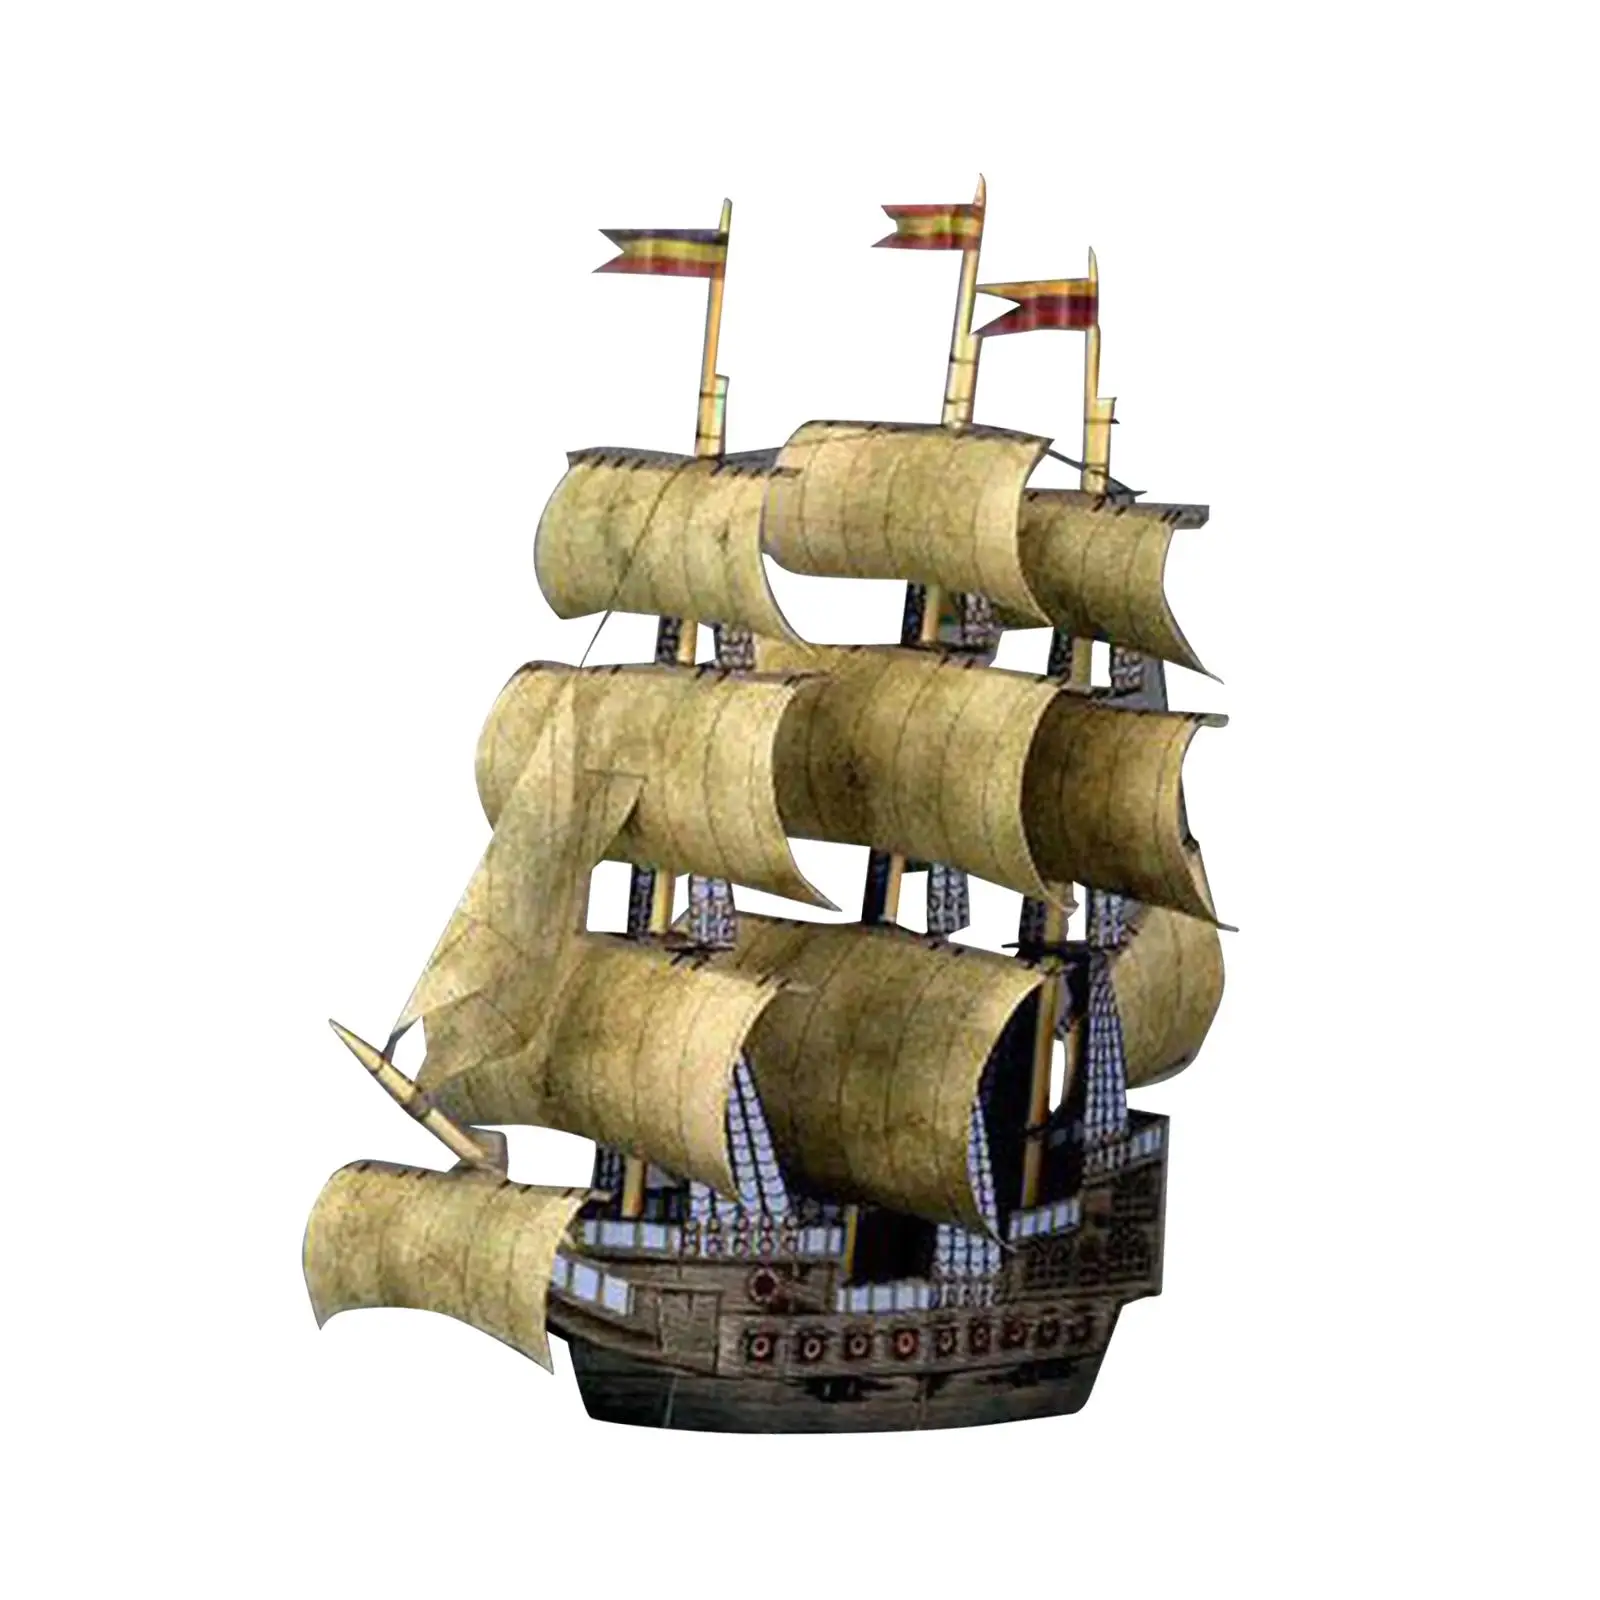 1:250 Scale Sailboat Ship Kits Tabletop Decor Gifts for Kids Children Adults